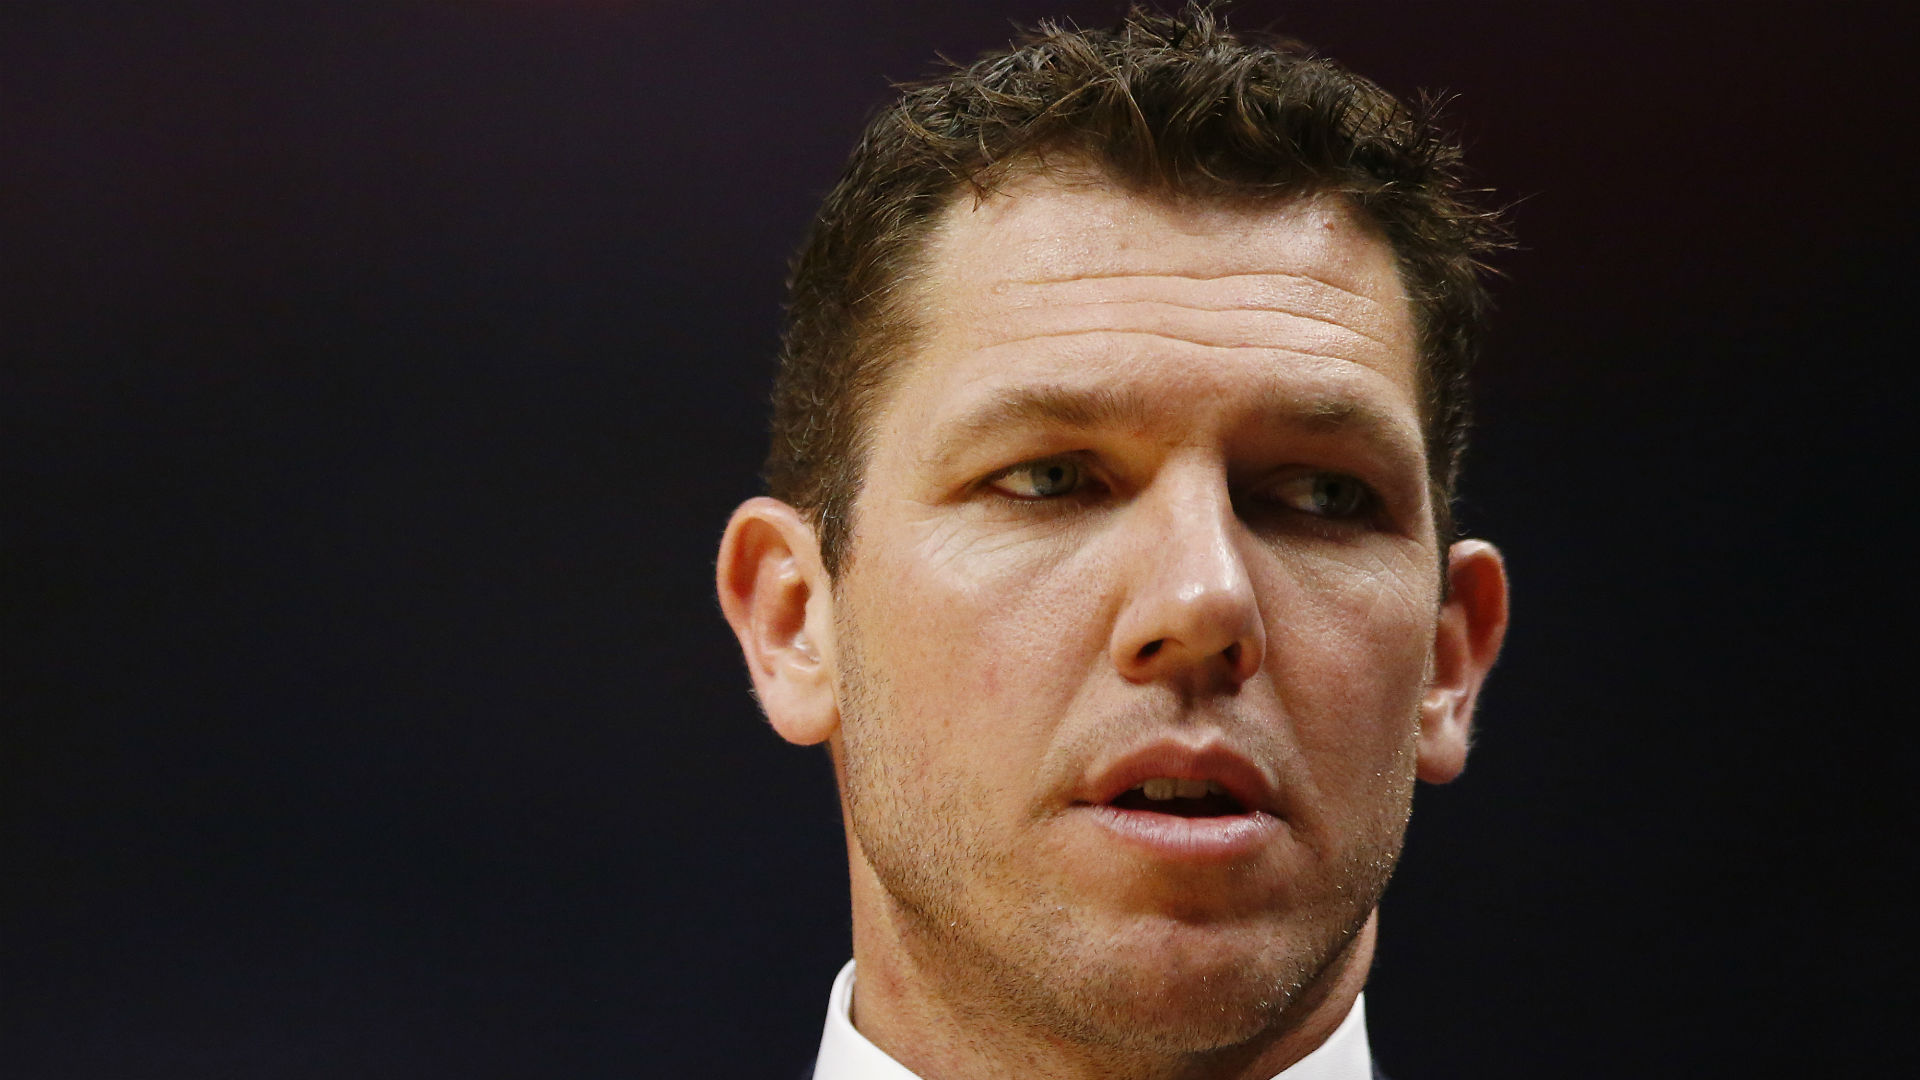 An investigation into allegations made against Luke Walton determined there was not sufficient evidence to support the accusations.